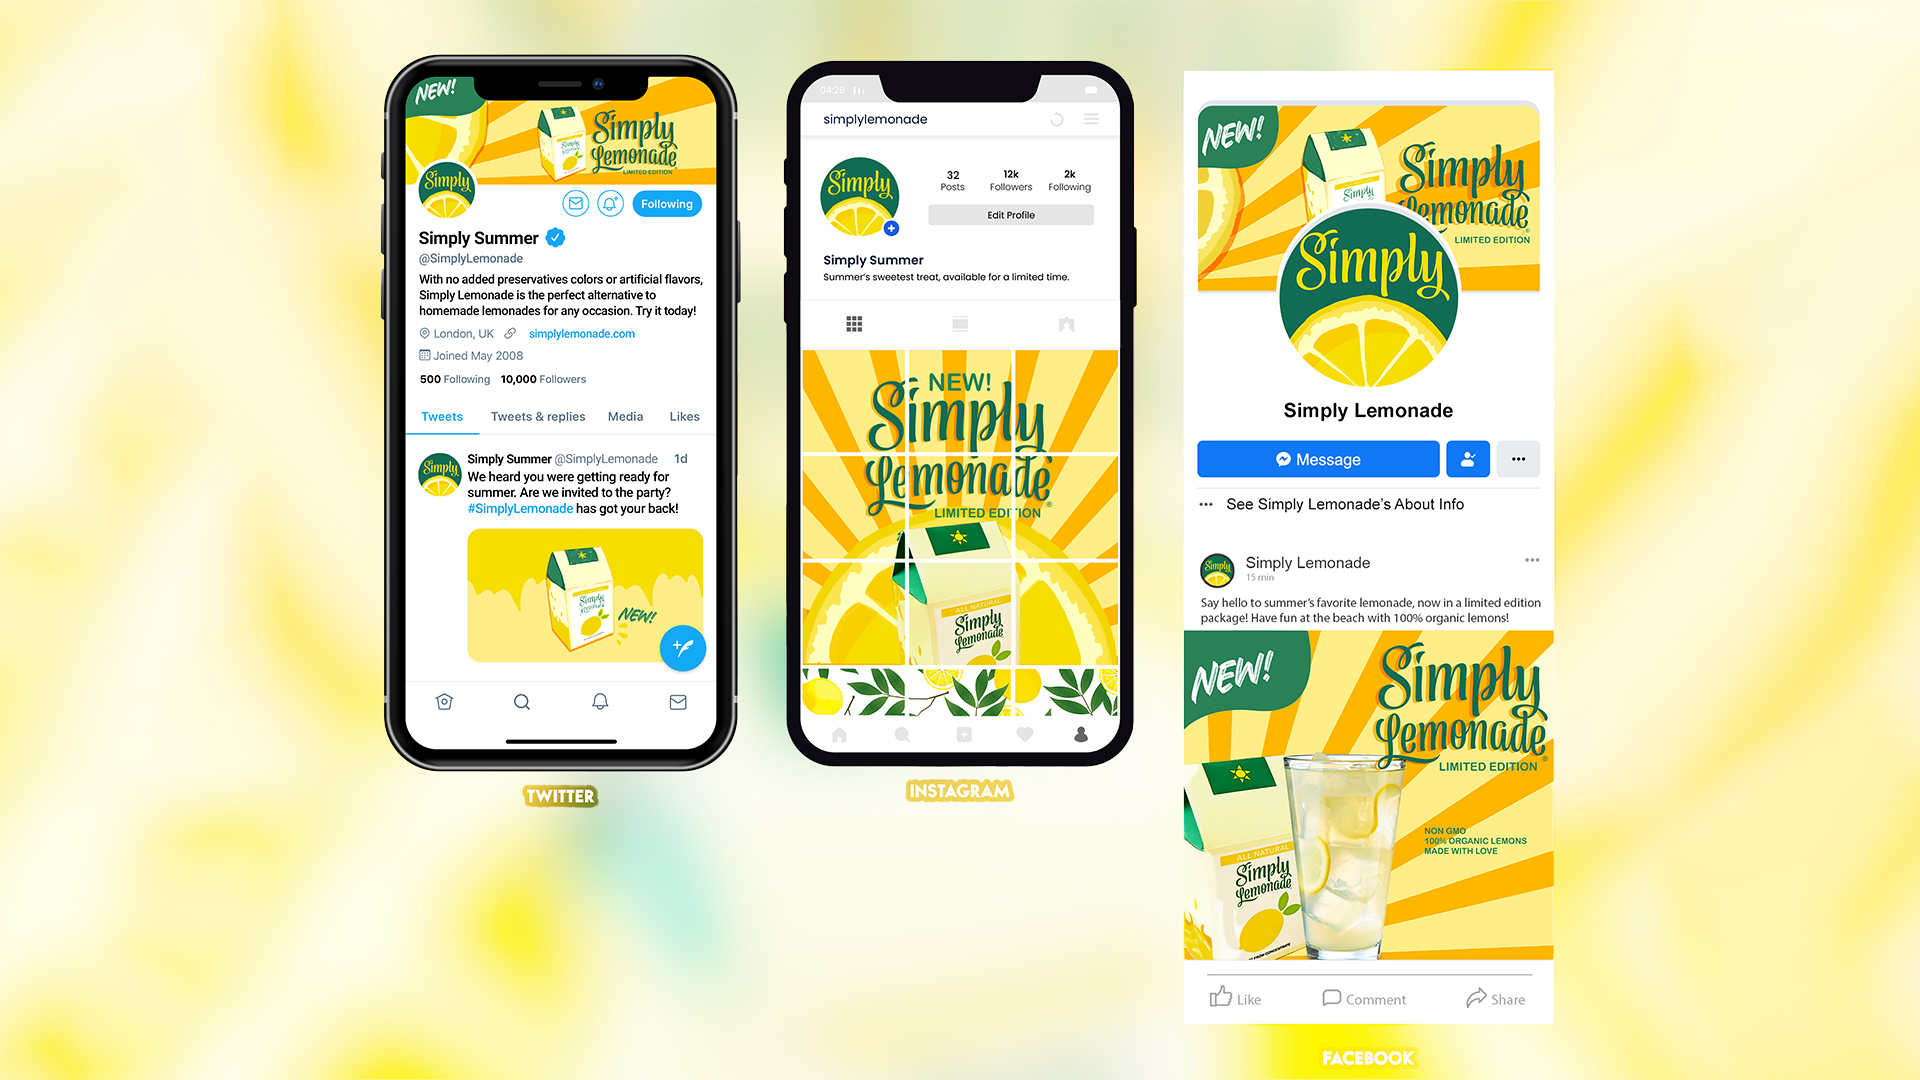  / "Simply Lemonade: Limited Edition; Social Media Campaign", social media mockups, various sizes for web, 2022. This project is a fictional social media campaign for the brand Simply Lemonade. My design was created with summer in mind, and makes use of tren